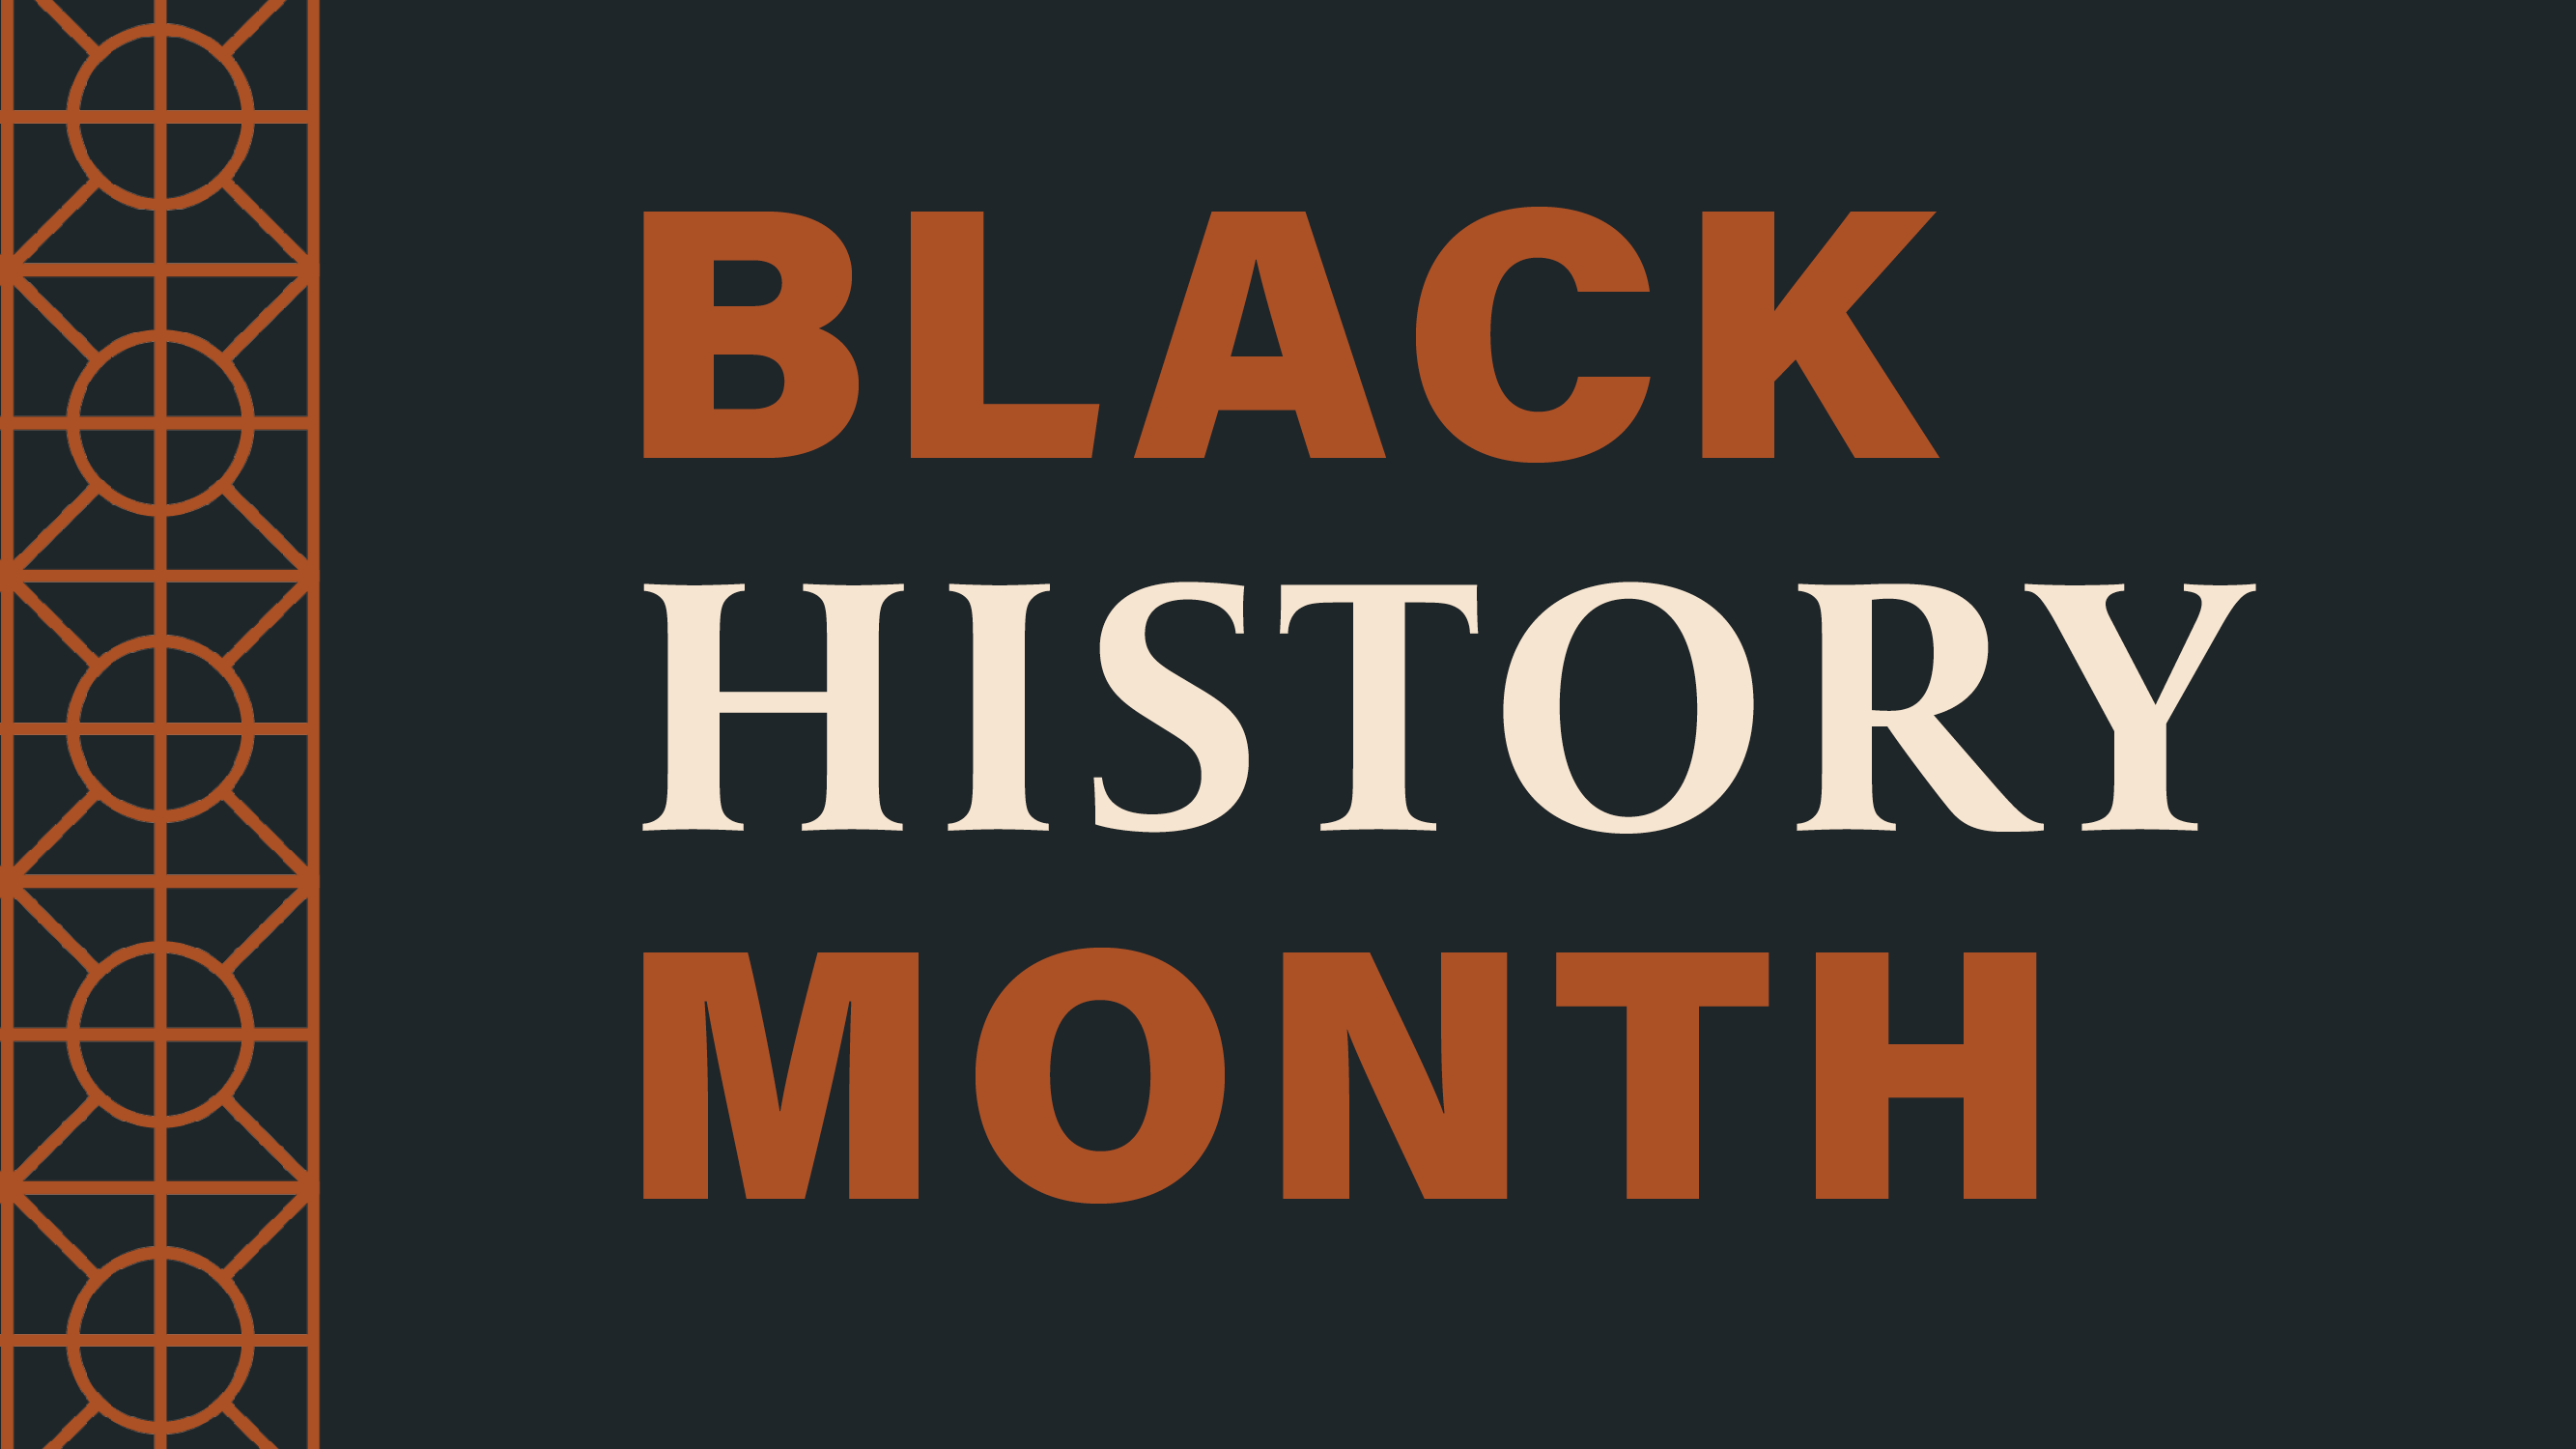 Celebrate Black History Month with the University Libraries